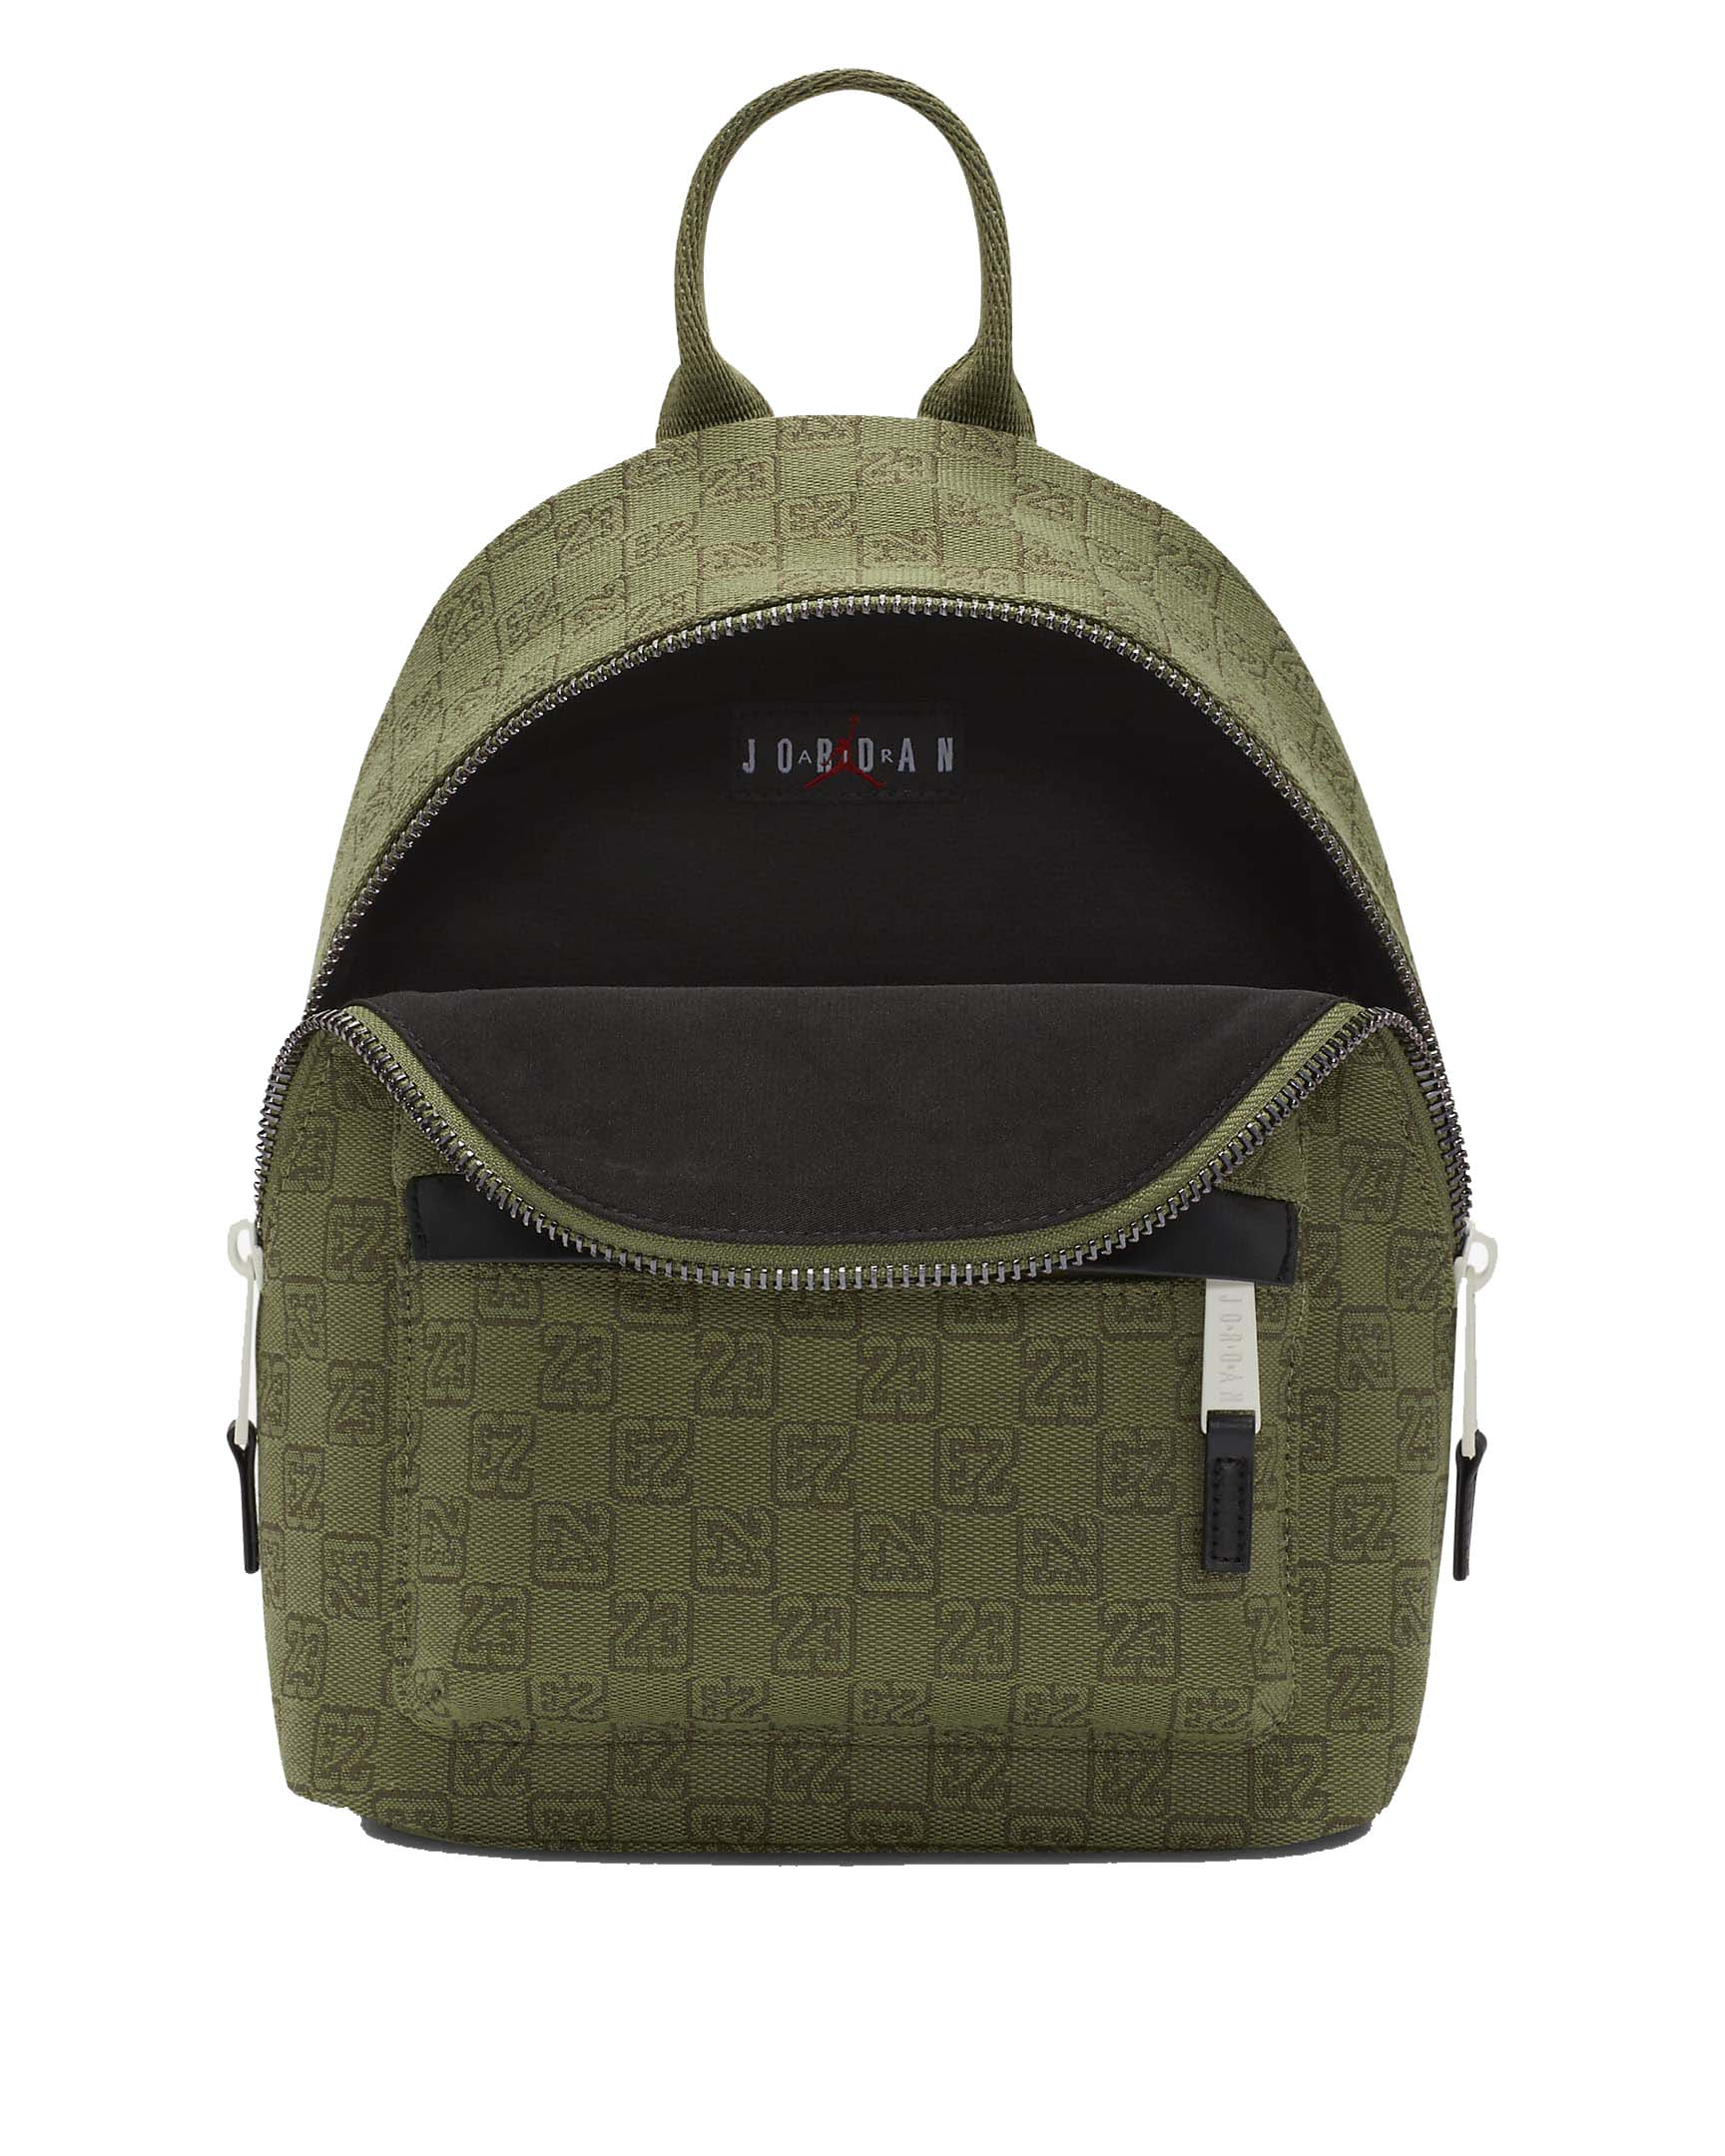 Jordan Monogram Mini Backpack Green in Polyester with Silver-tone - US